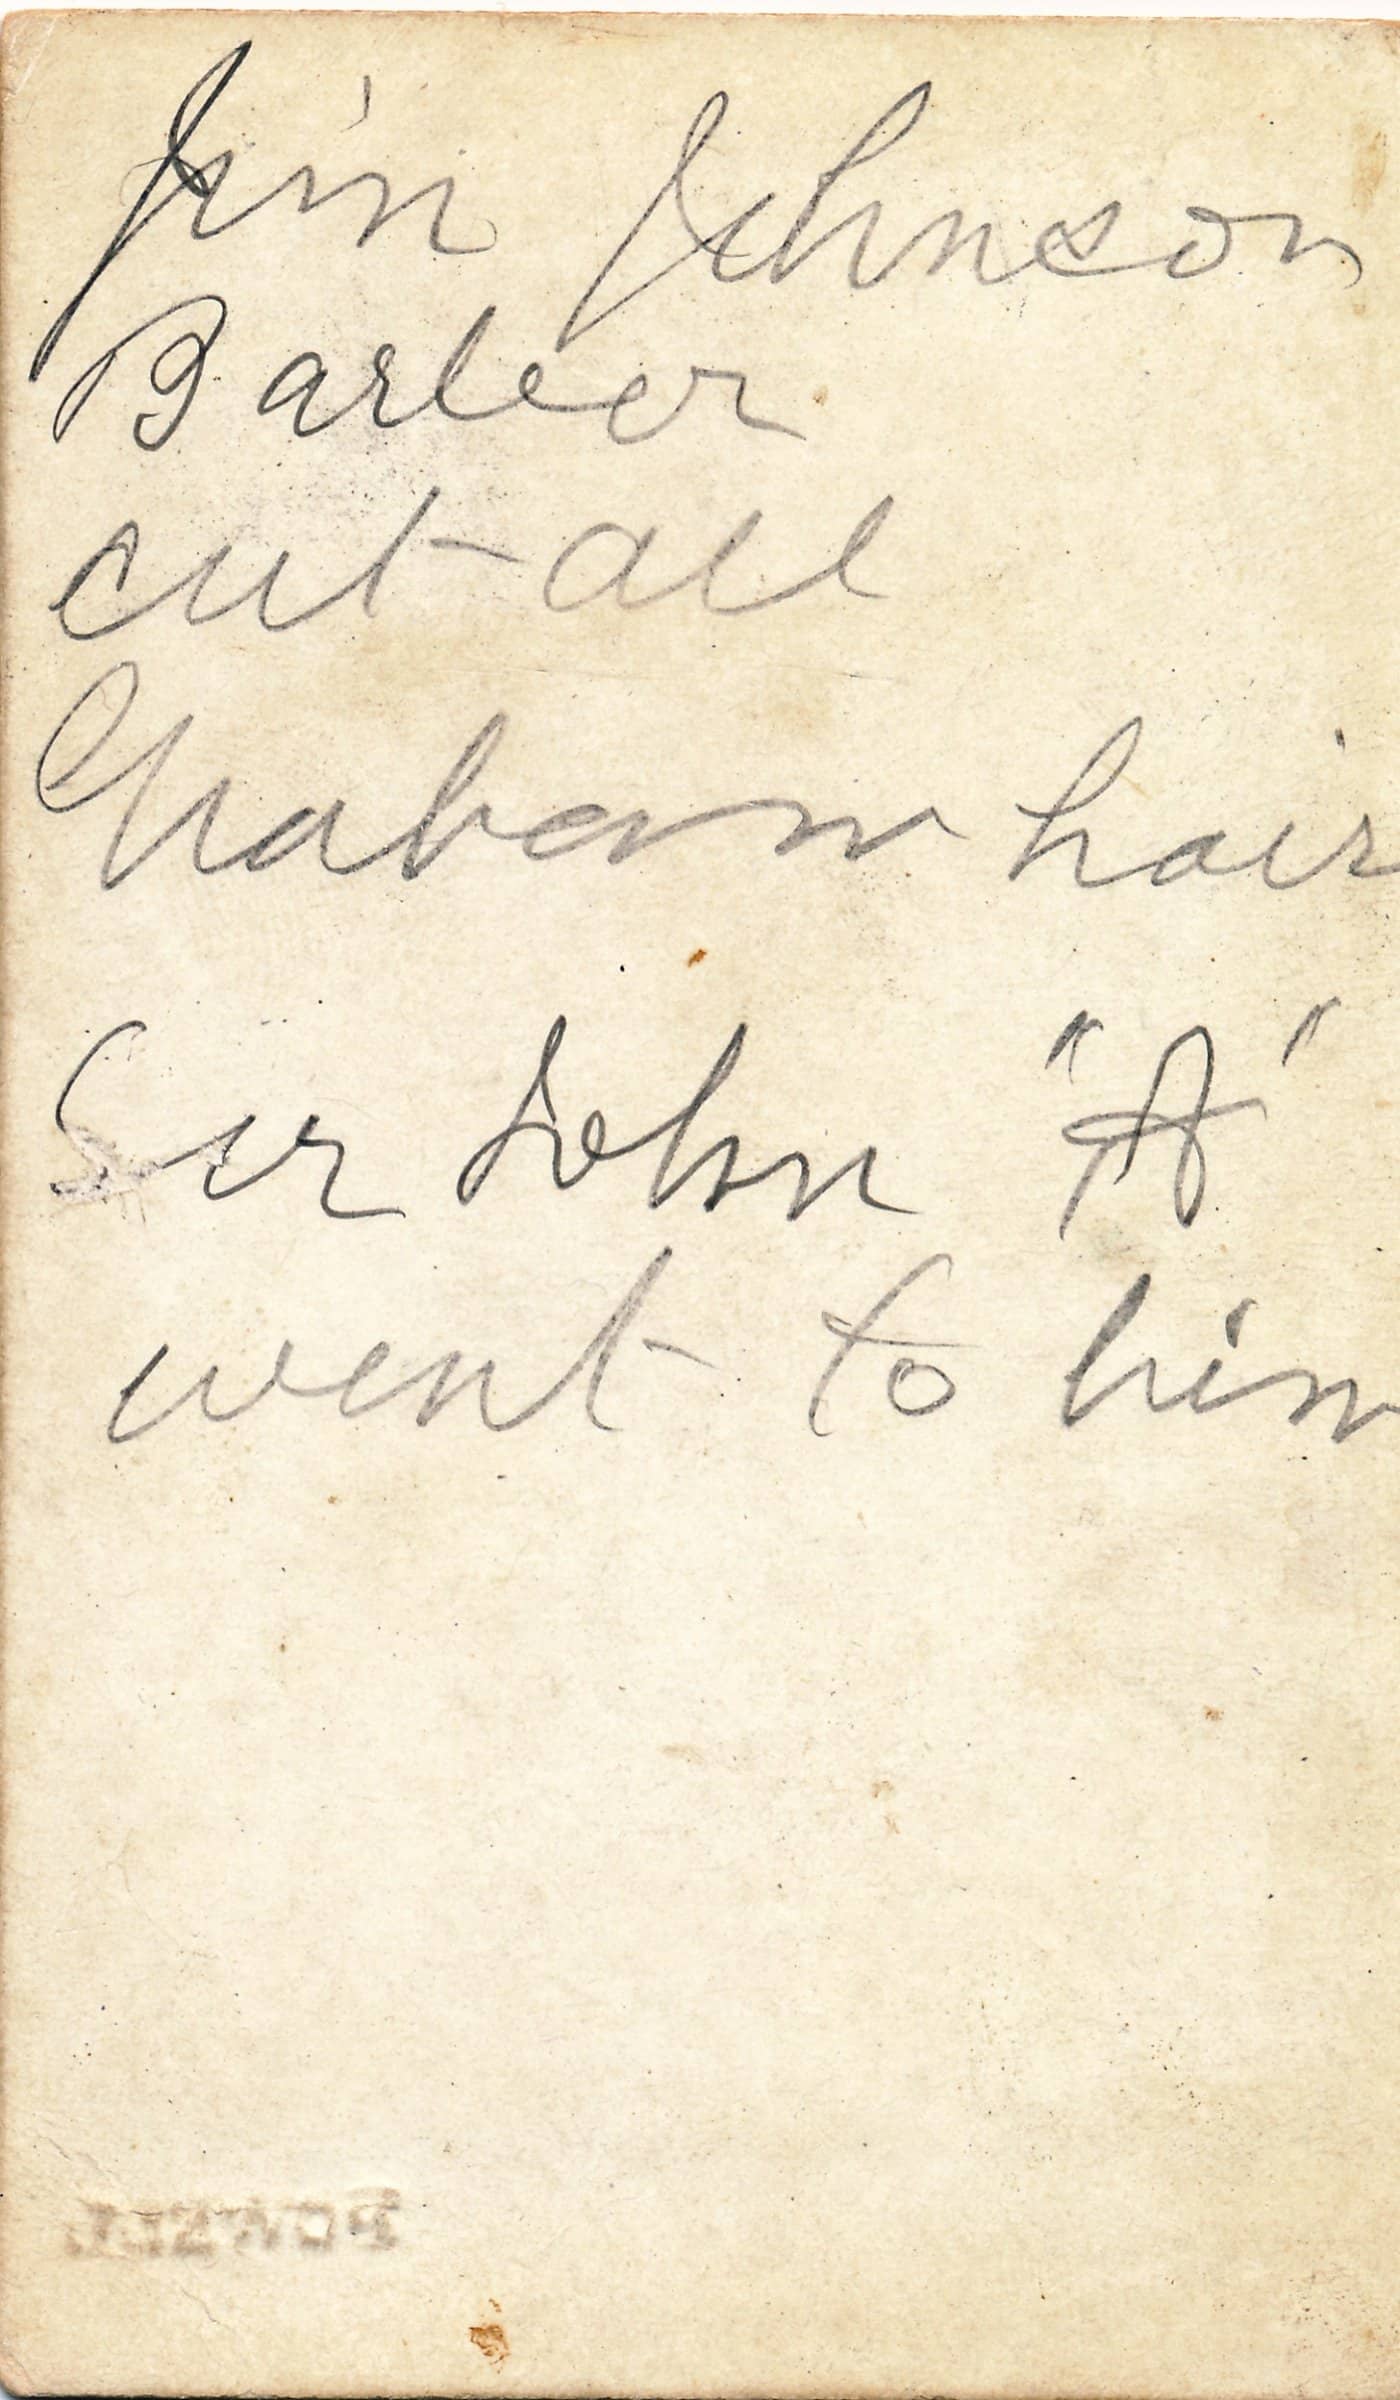 The verso of a calling card with cursive handwriting on it. The card says, "Jim Johnson, Barber cut all [illegible] hair. Sir John "A" went to him."